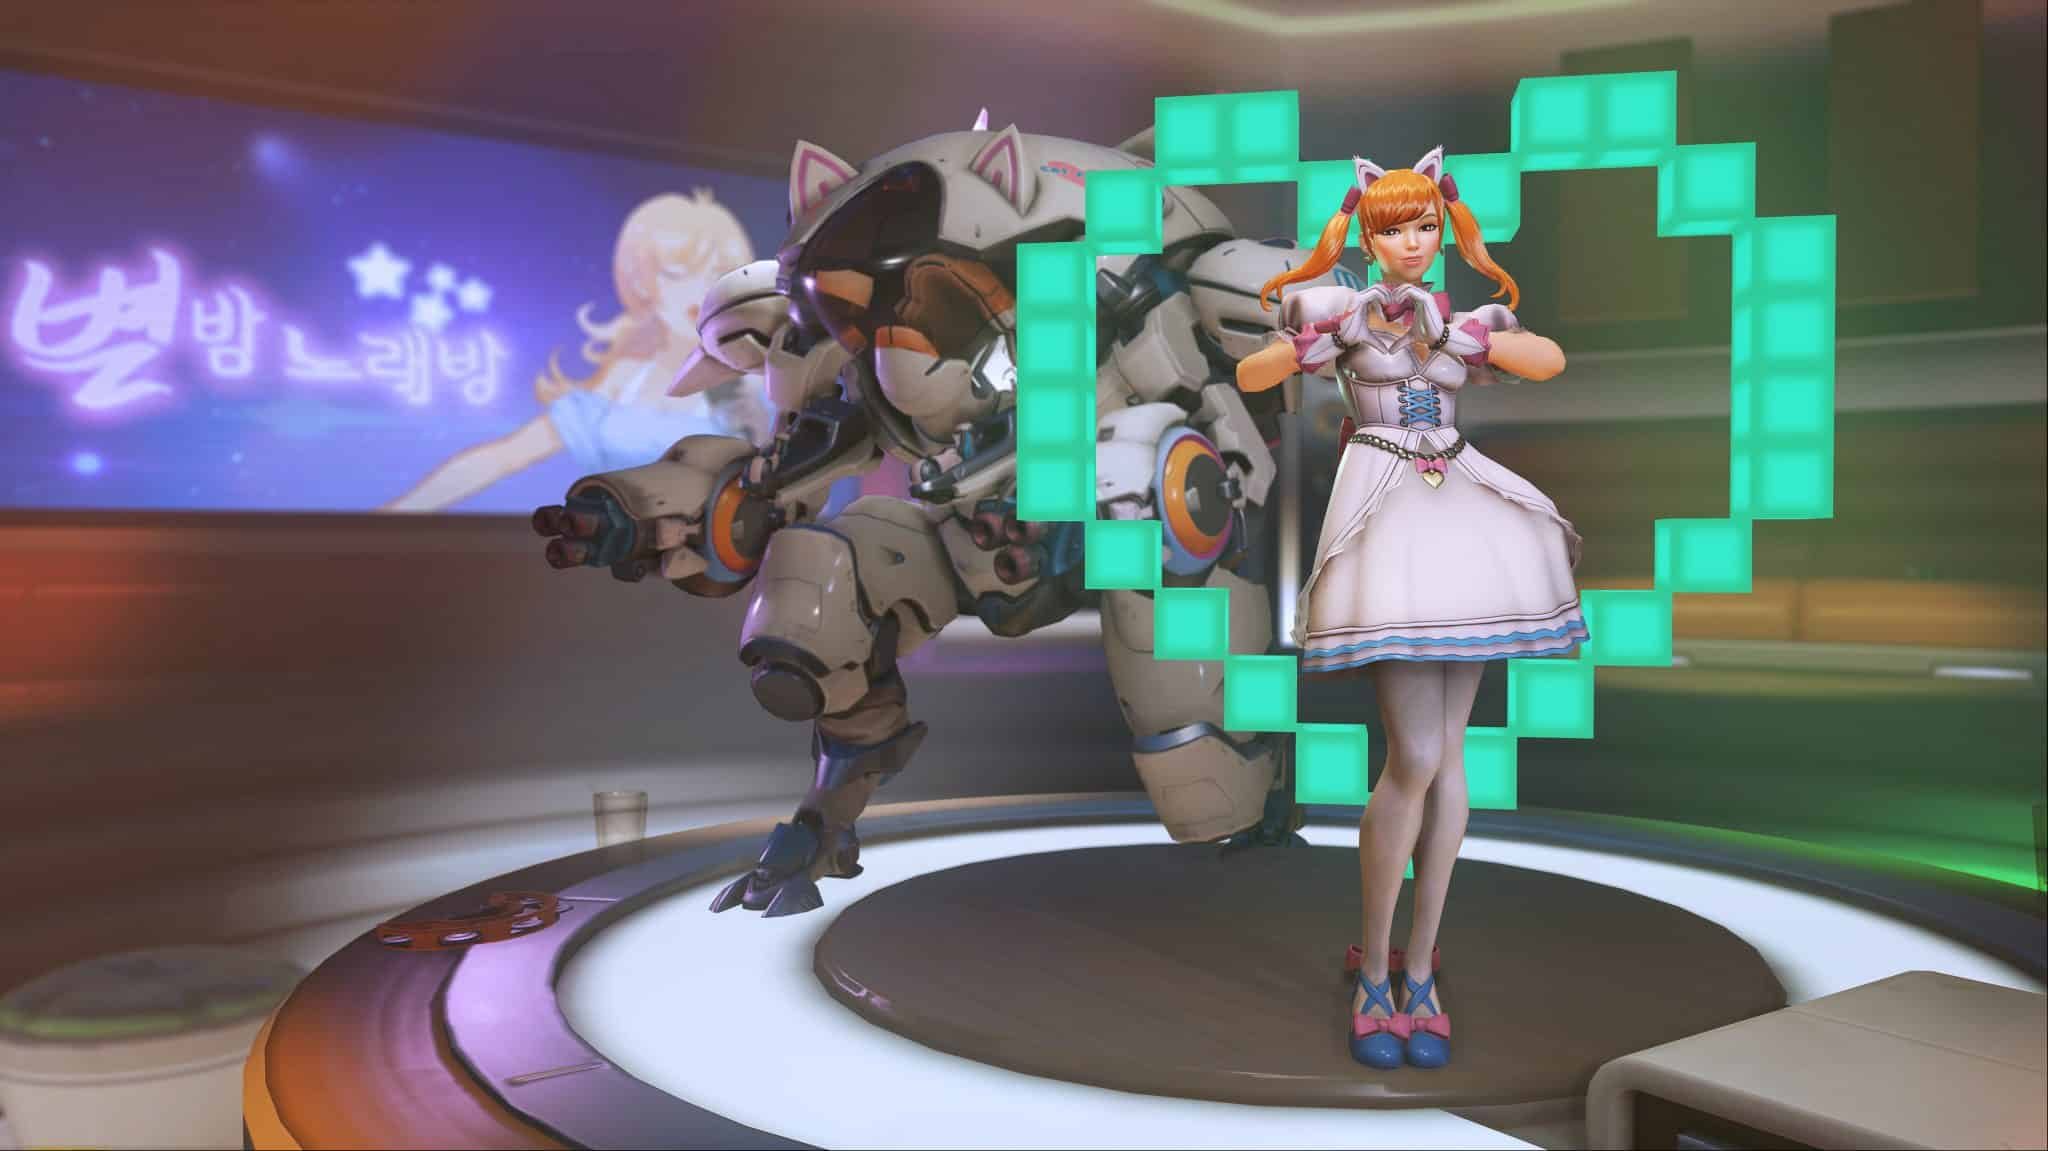 overwatch-skins-transfer-overwatch-2-scaled-7465399